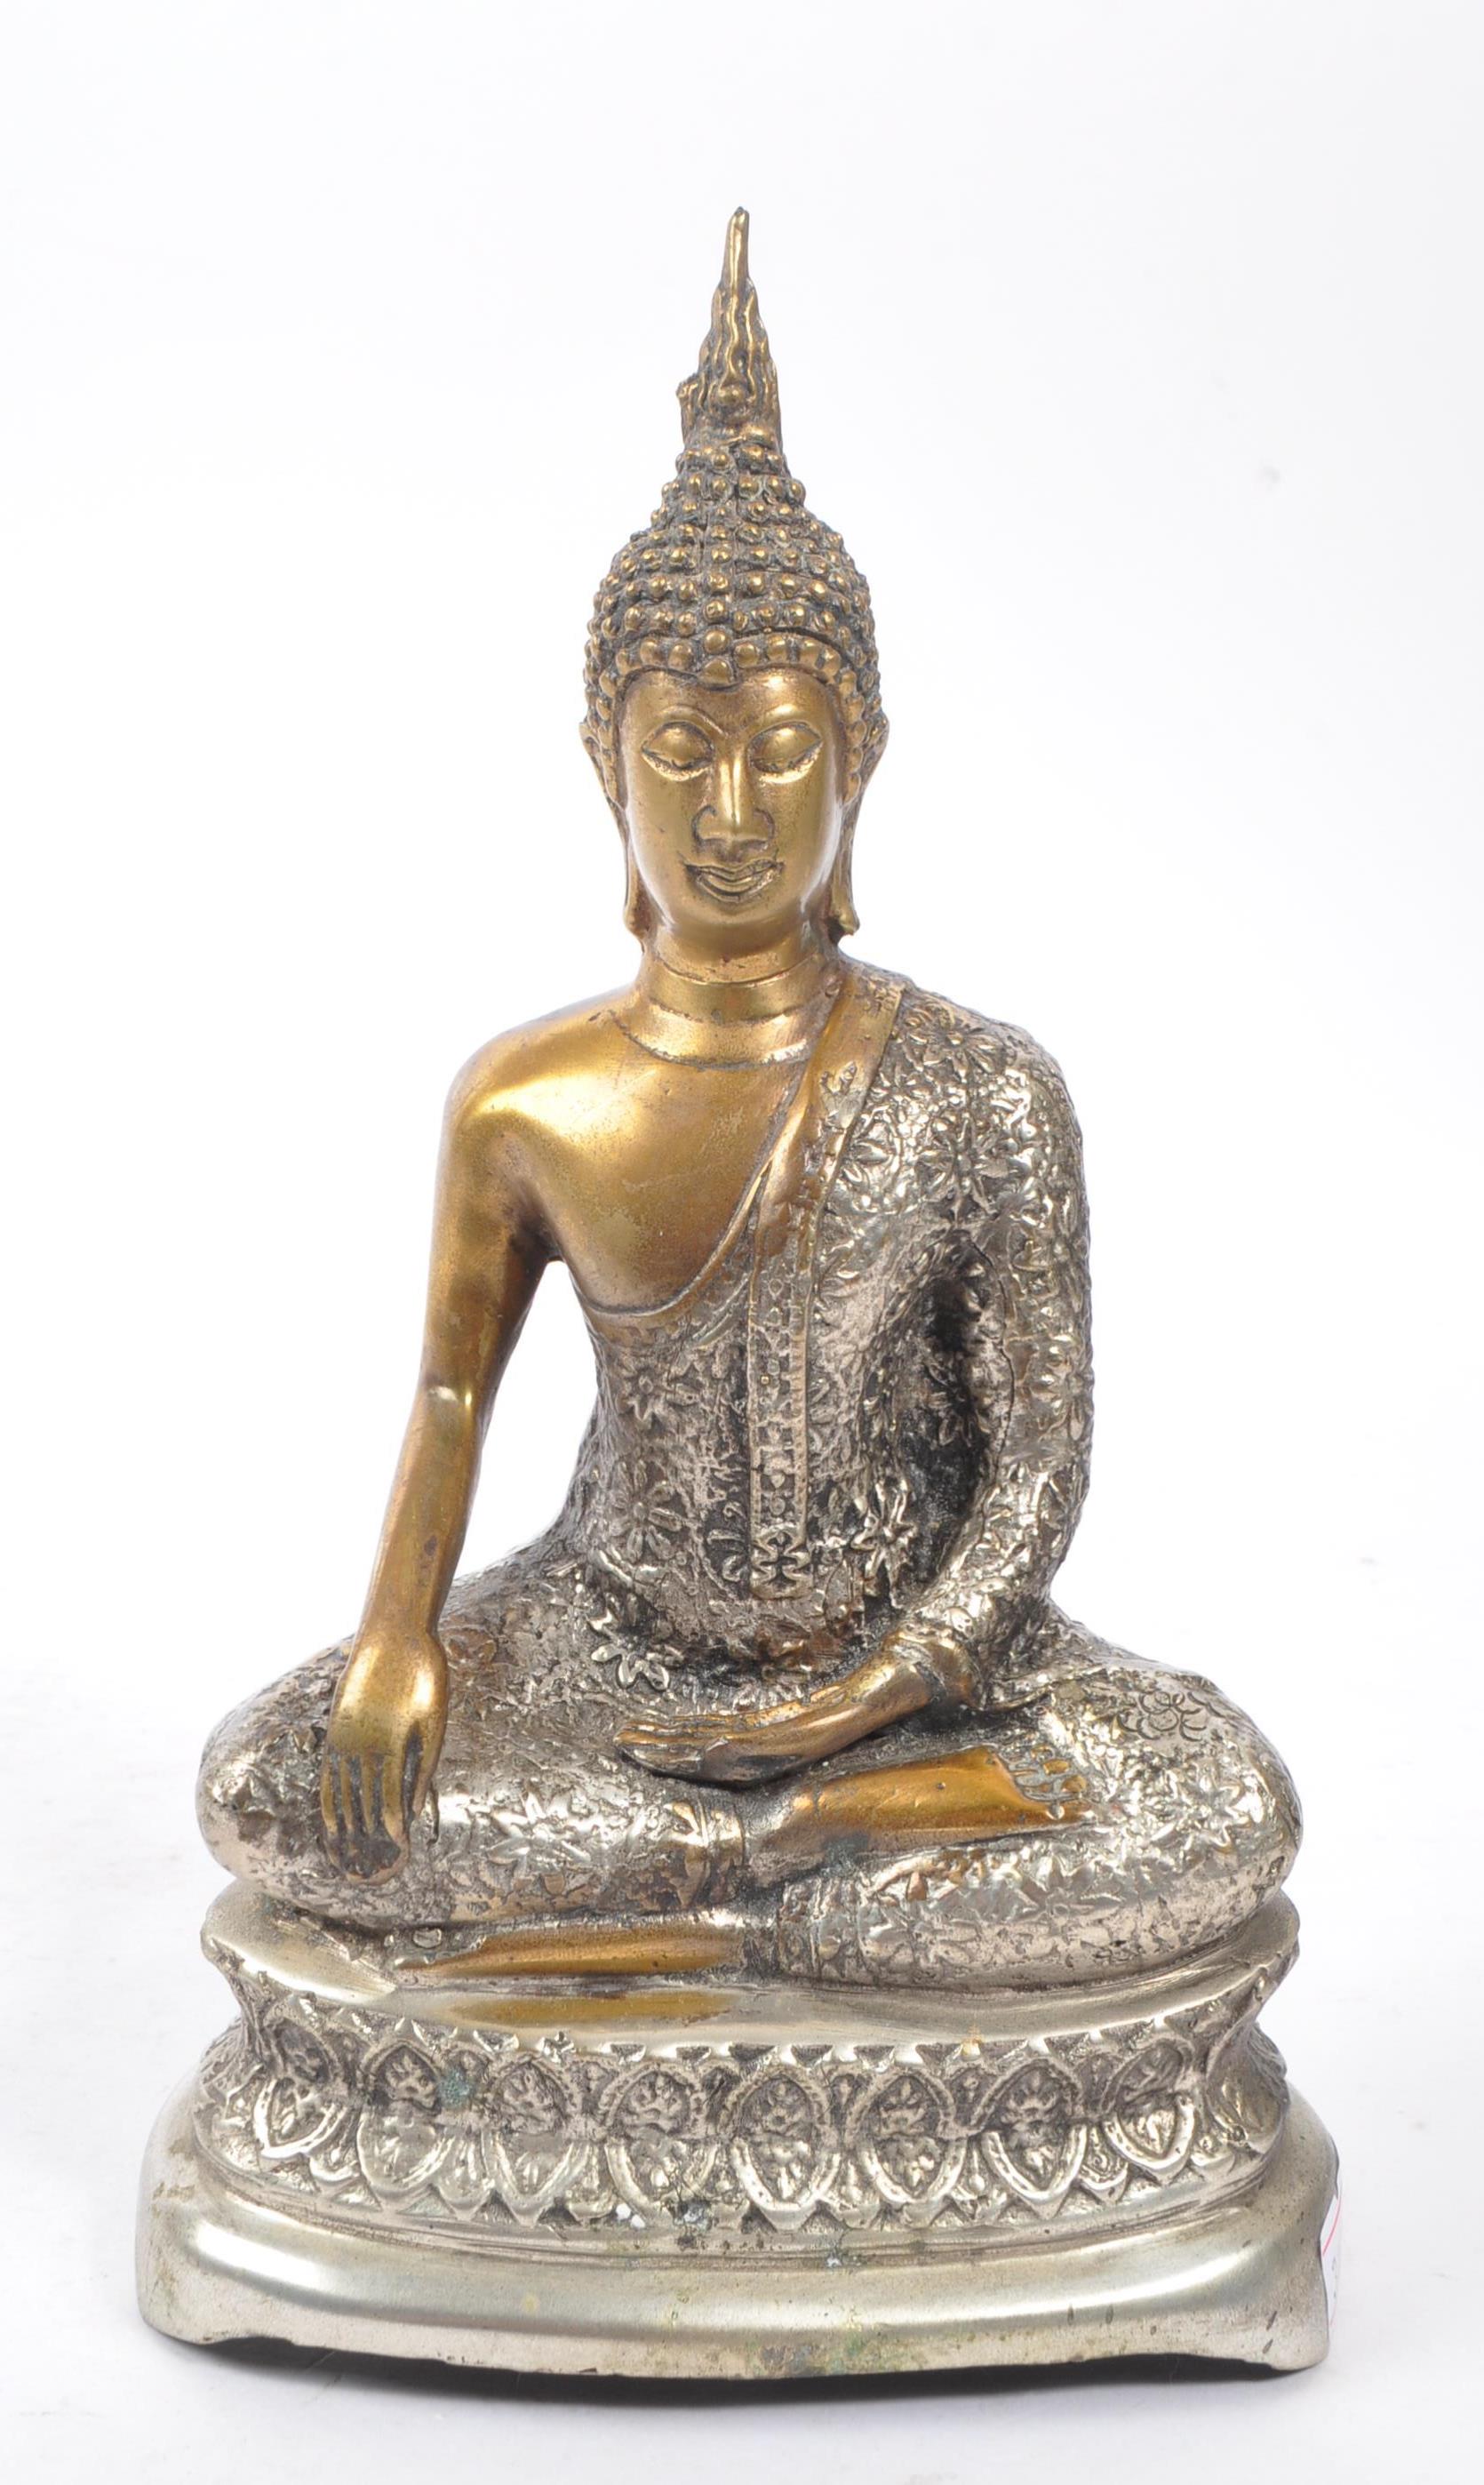 PAINTED GOLD AND SILVER BRONZE BUDDHA FIGURE